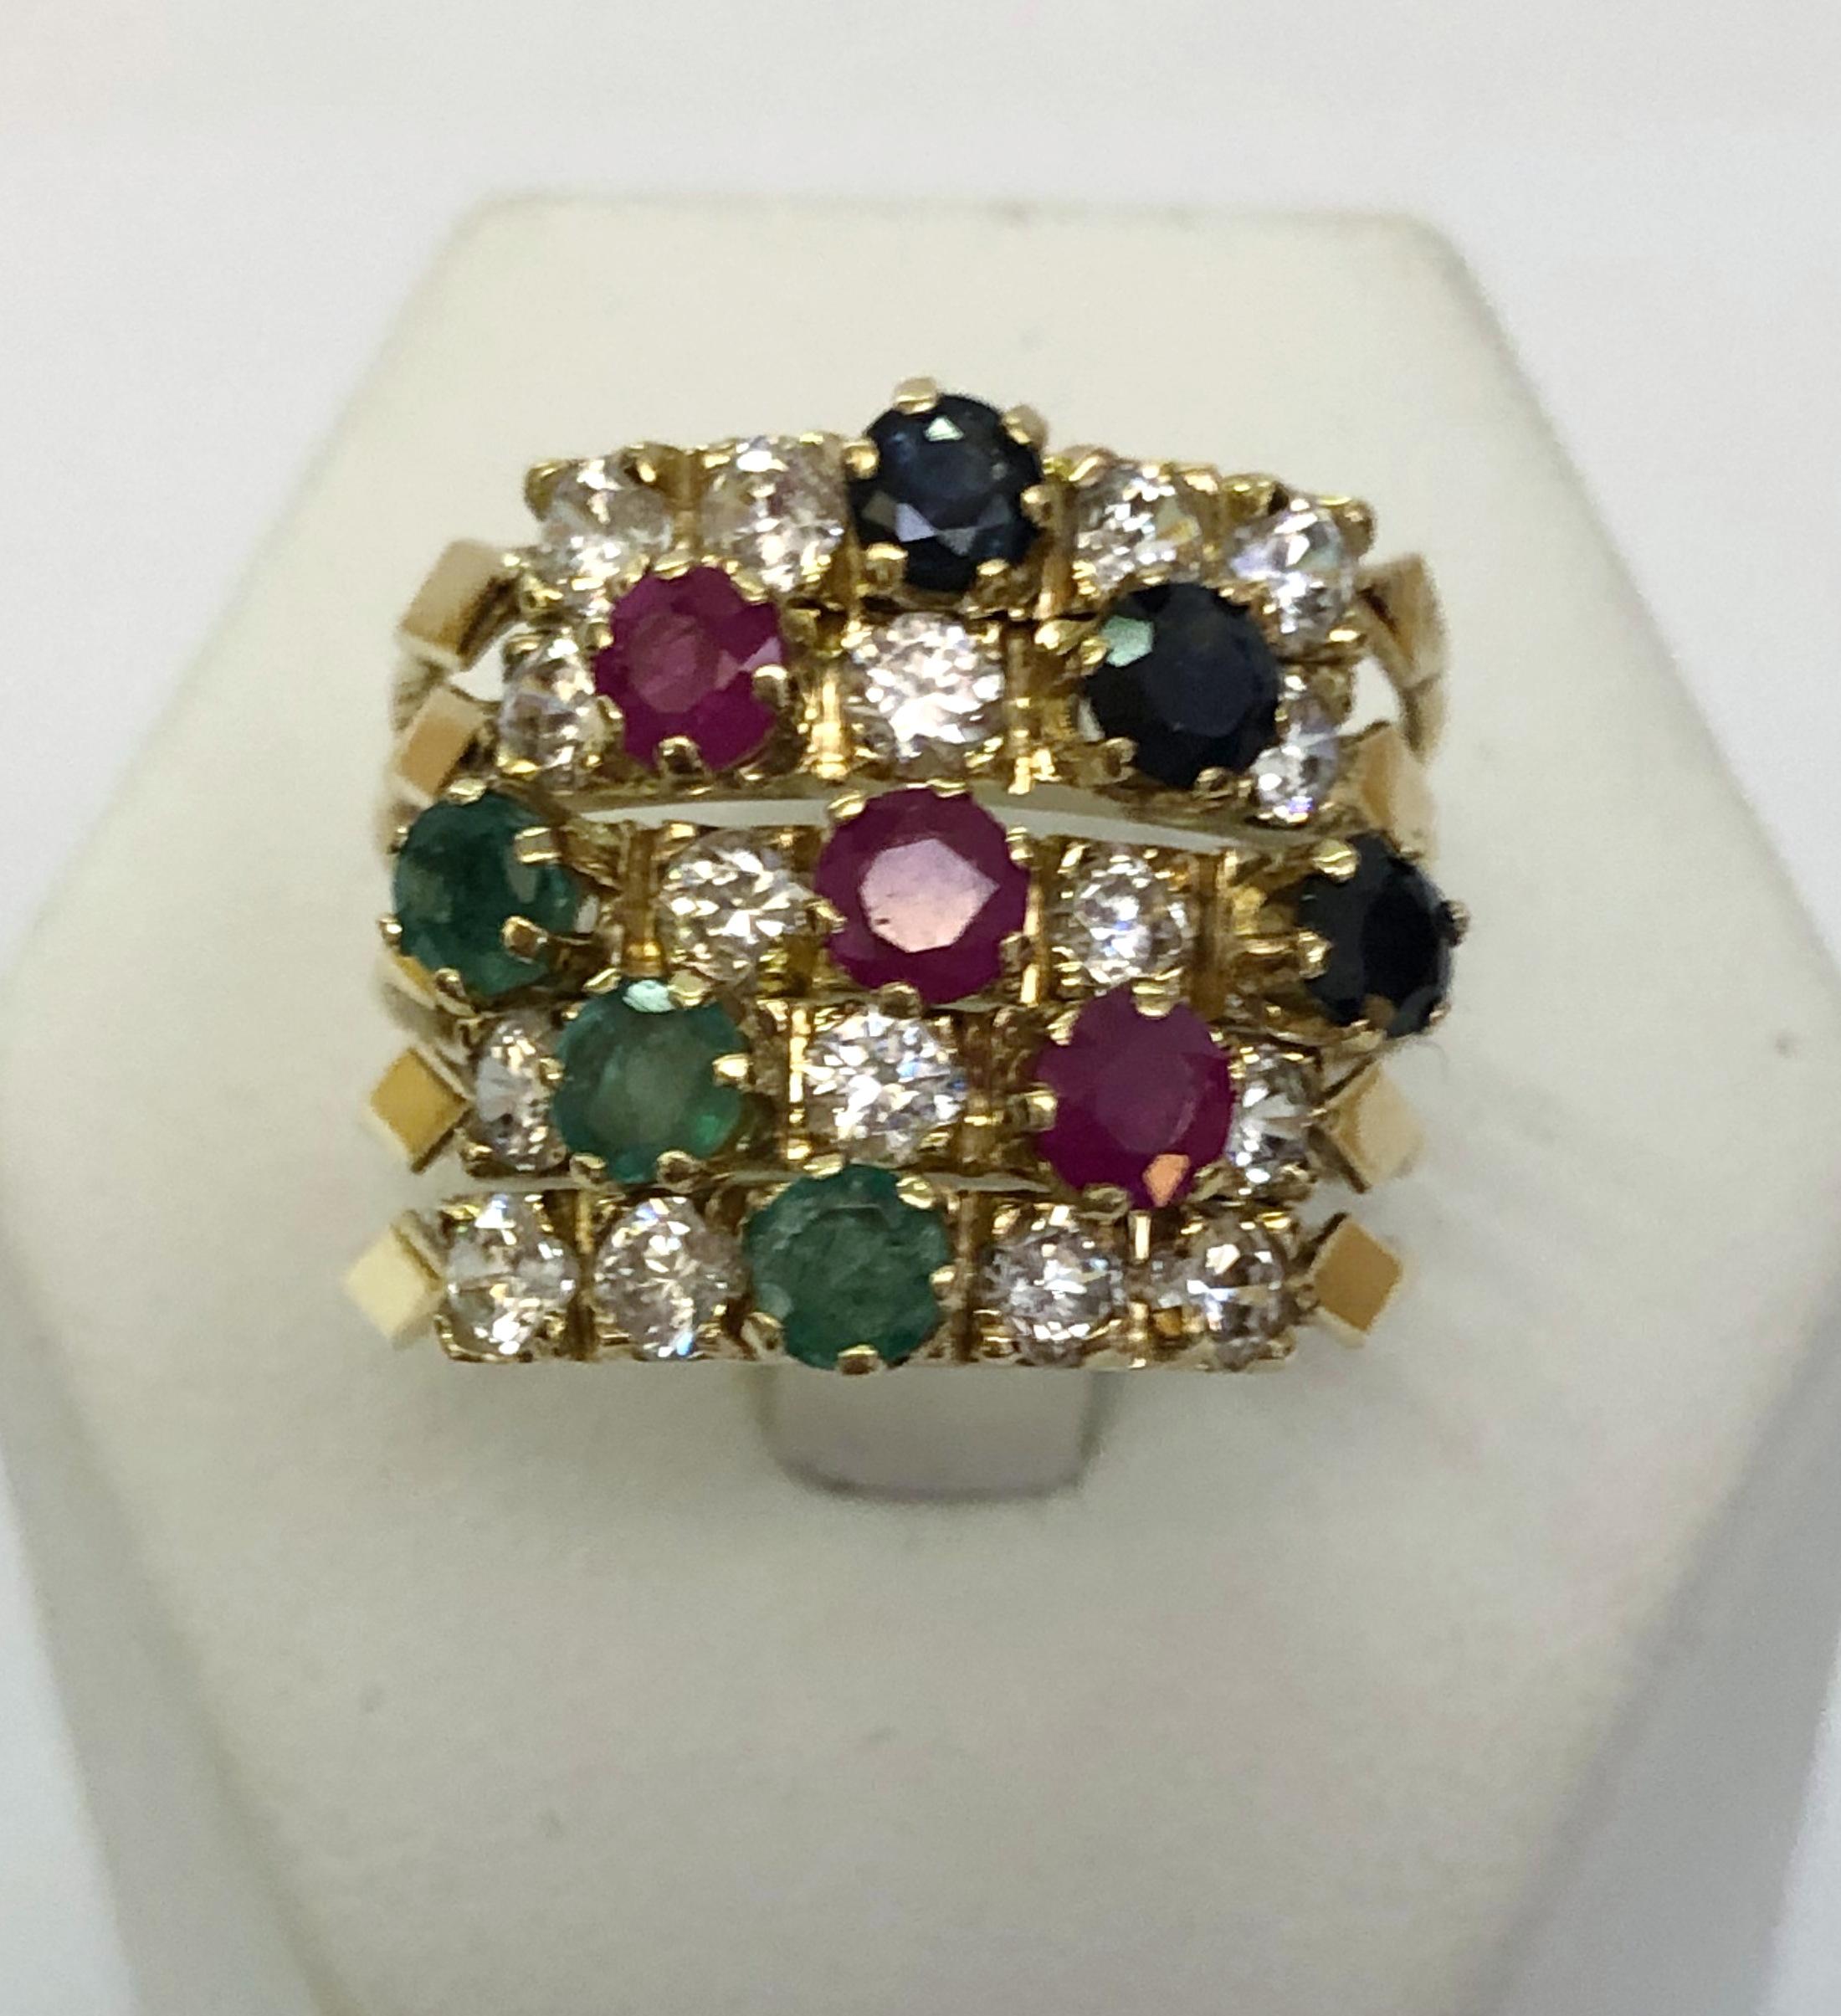 14 karat yellow gold ring made of 5 bands with emeralds, rubies, sapphires and small diamonds / Made in Italy 1960s
Ring size US 7.5